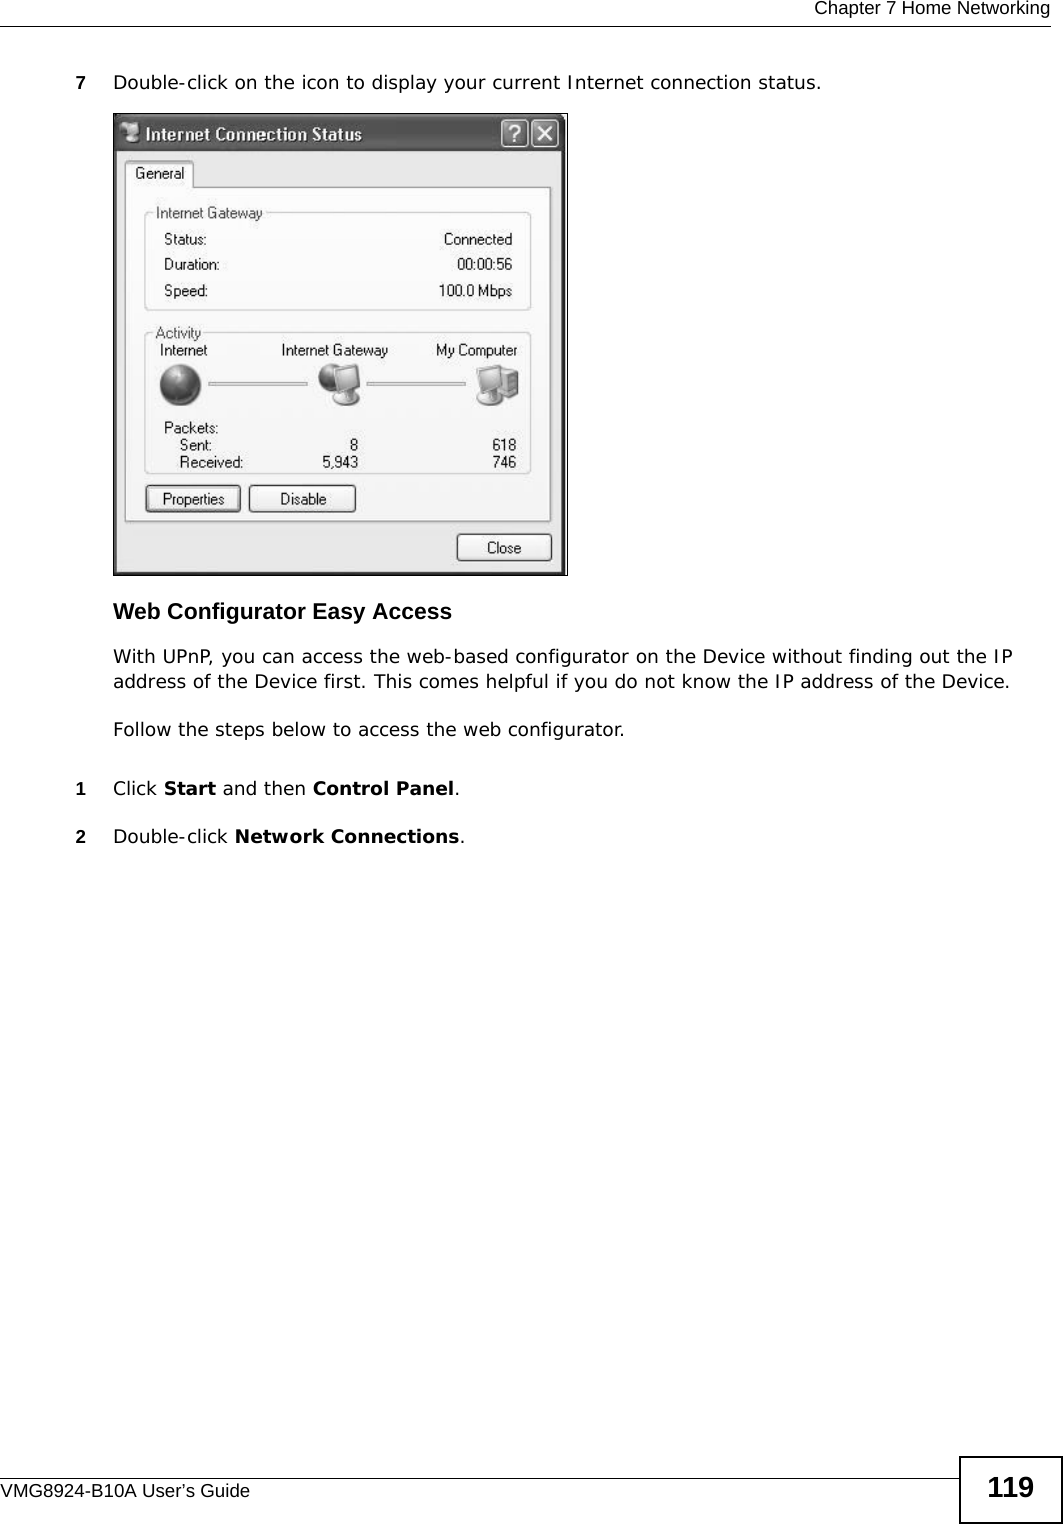  Chapter 7 Home NetworkingVMG8924-B10A User’s Guide 1197Double-click on the icon to display your current Internet connection status.Internet Connection StatusWeb Configurator Easy AccessWith UPnP, you can access the web-based configurator on the Device without finding out the IP address of the Device first. This comes helpful if you do not know the IP address of the Device.Follow the steps below to access the web configurator.1Click Start and then Control Panel. 2Double-click Network Connections. 